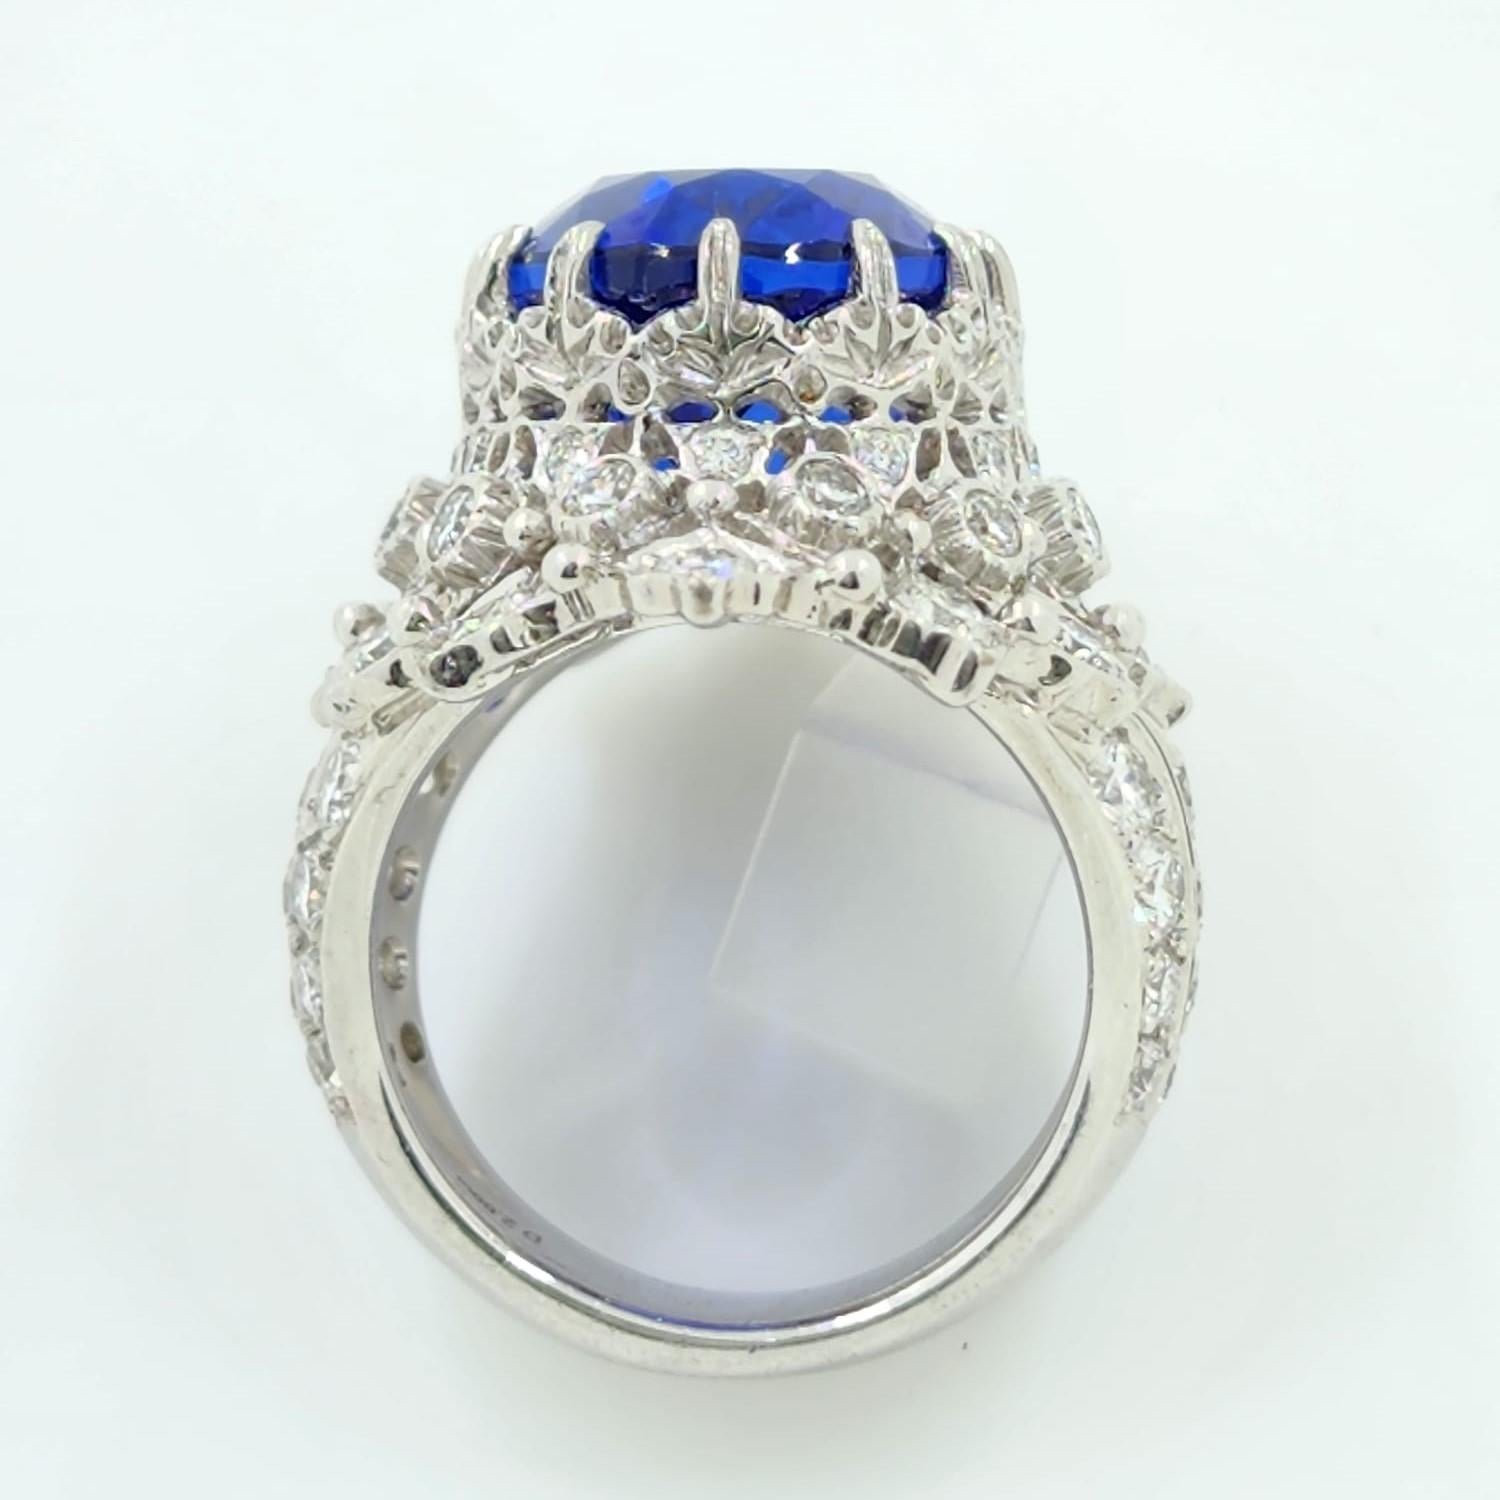 Feast your eyes on a masterpiece of craftsmanship and design, our extraordinary Tanzanite and Diamond Ring. This opulent piece is the epitome of luxury, a celebration of time, skill, and the finest materials, with over two months of meticulous